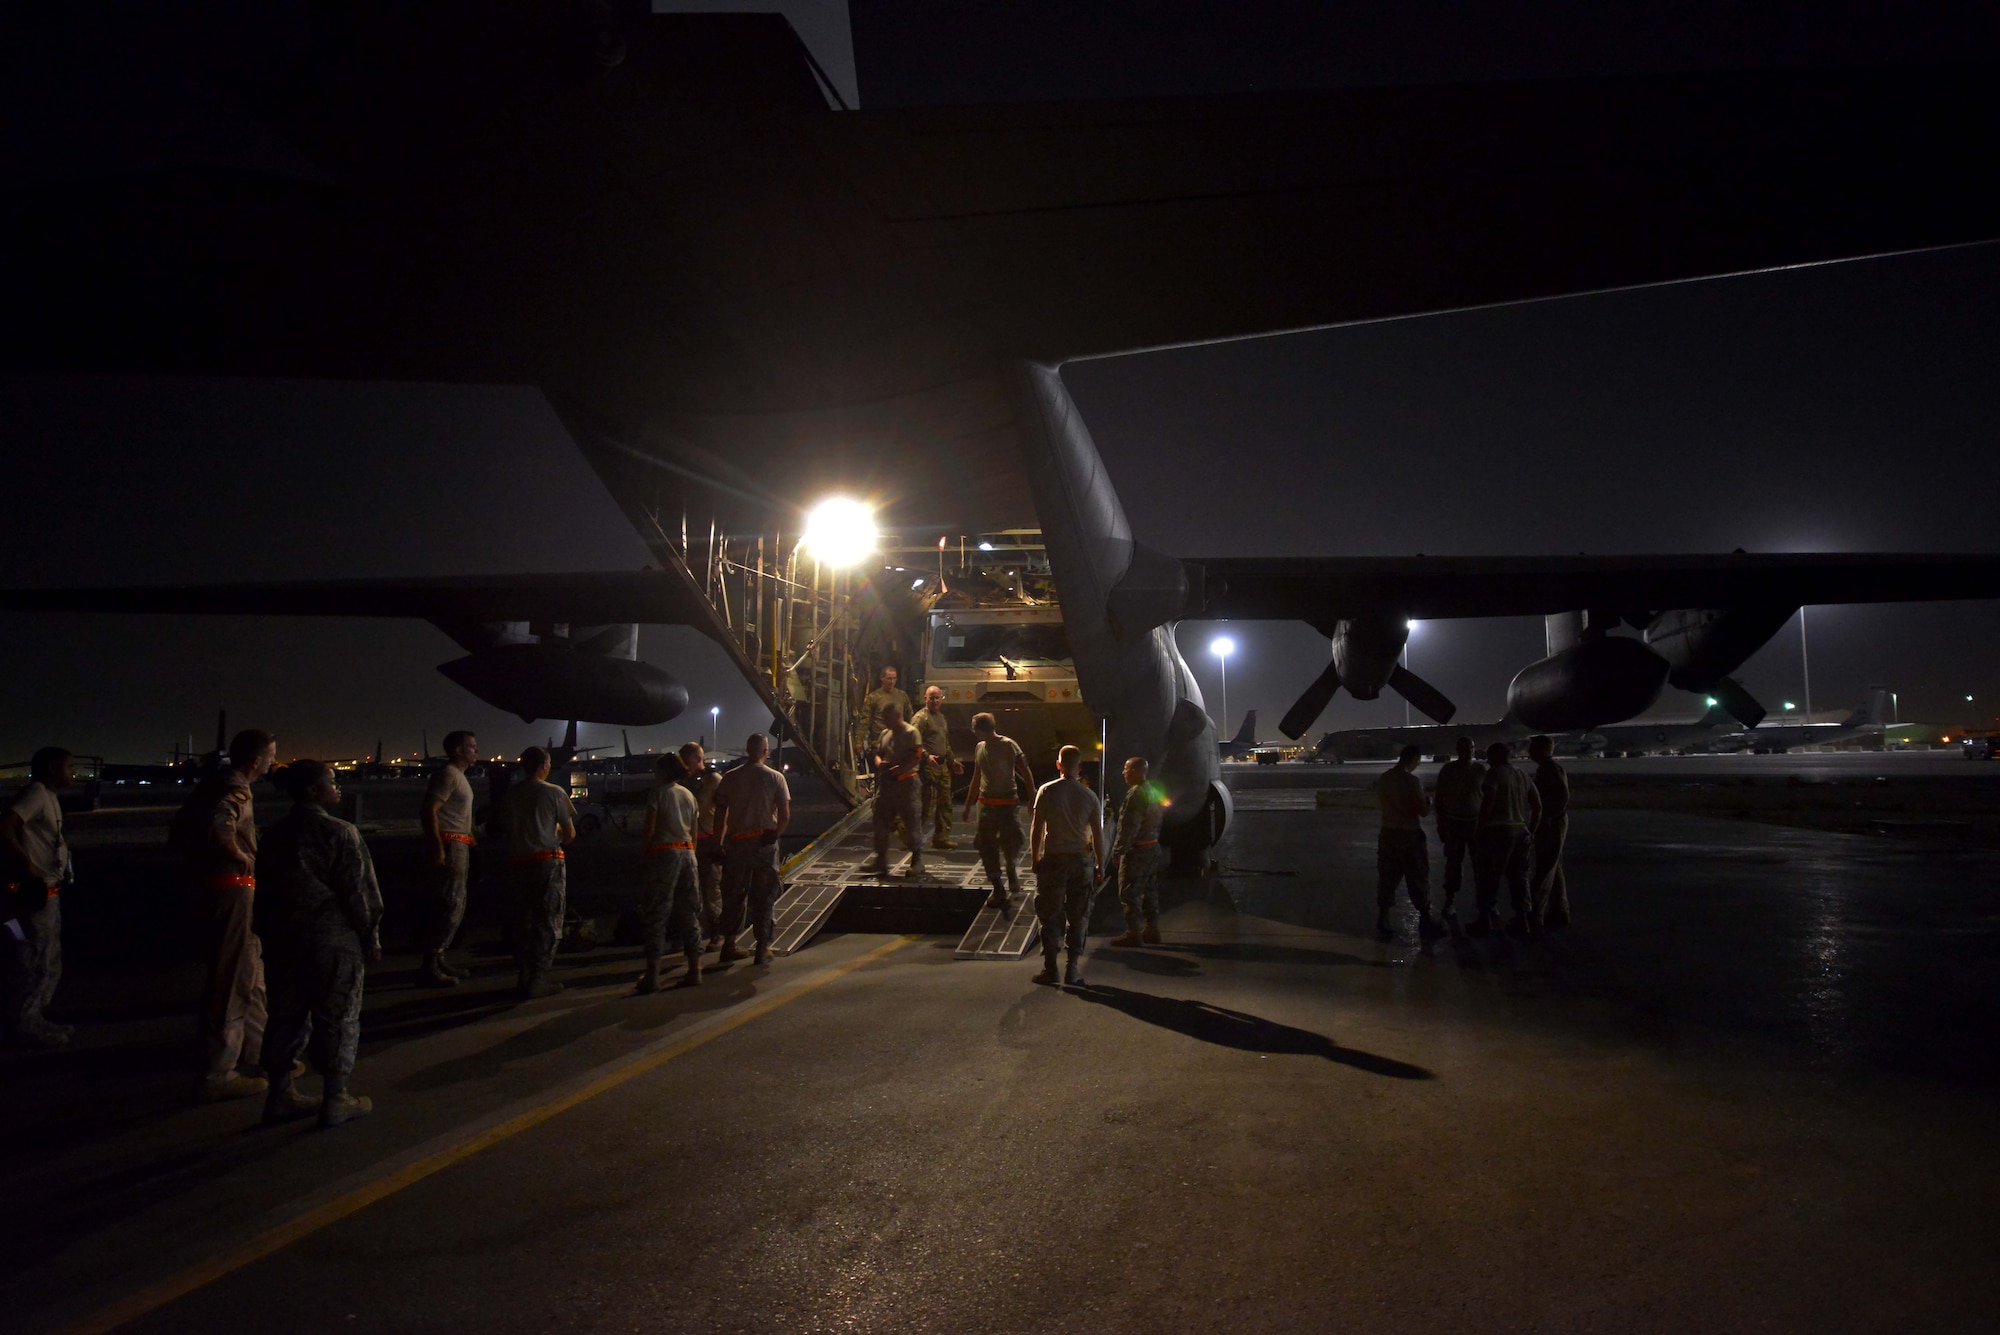 Aircrew of the 746th Expeditionary Airlift Squadron and aerial porters from the 8th Expeditionary Air Mobility Squadron complete final safety checks of a P-19 Aircraft Rescue Fire Fighting vehicle tie-down inside a C-130J Hercules prior to closing the cargo door   October 12, 2015 at Al Udeid Air Base, Qatar. Aircrew from the 746th EAS received help from Airmen of the 8th EAMS to load the P-19 ARFF vehicle that will be used at a Forward Operating Base. (U.S. Air Force photo/Staff Sgt. Alexandre Montes)